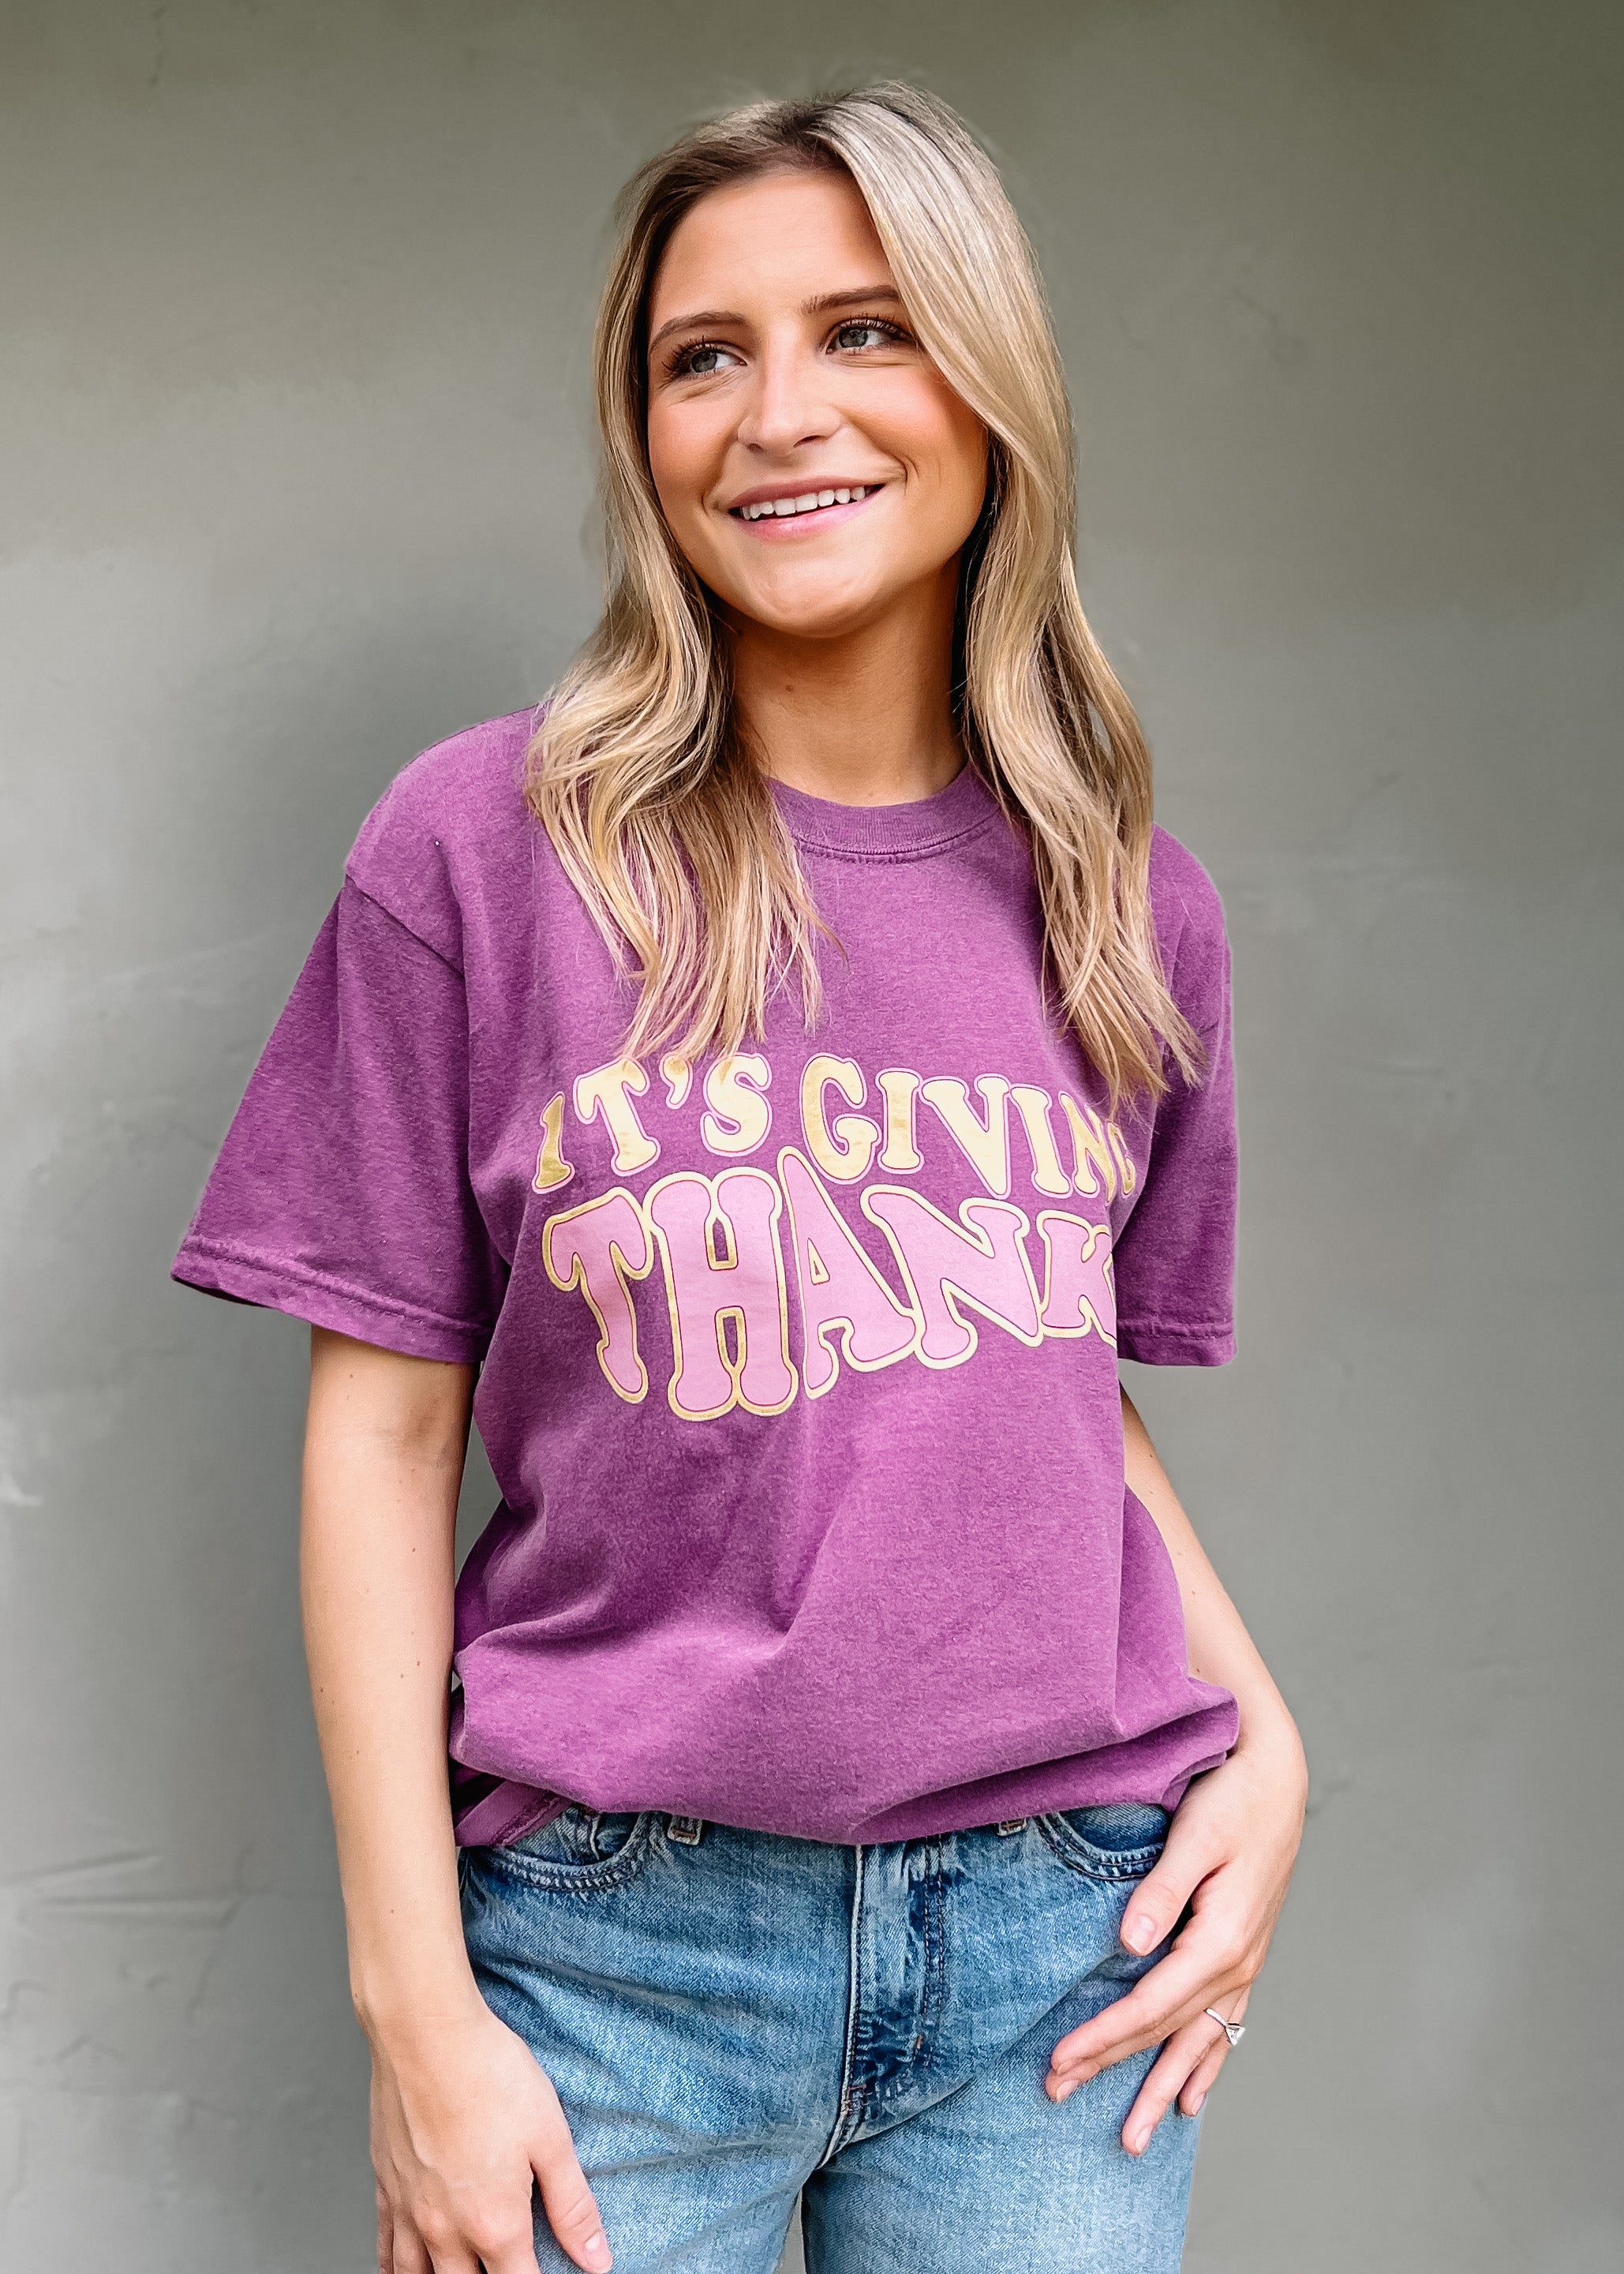 Charlie Southern: It's Giving Thanks Graphic Tee, Burgundy